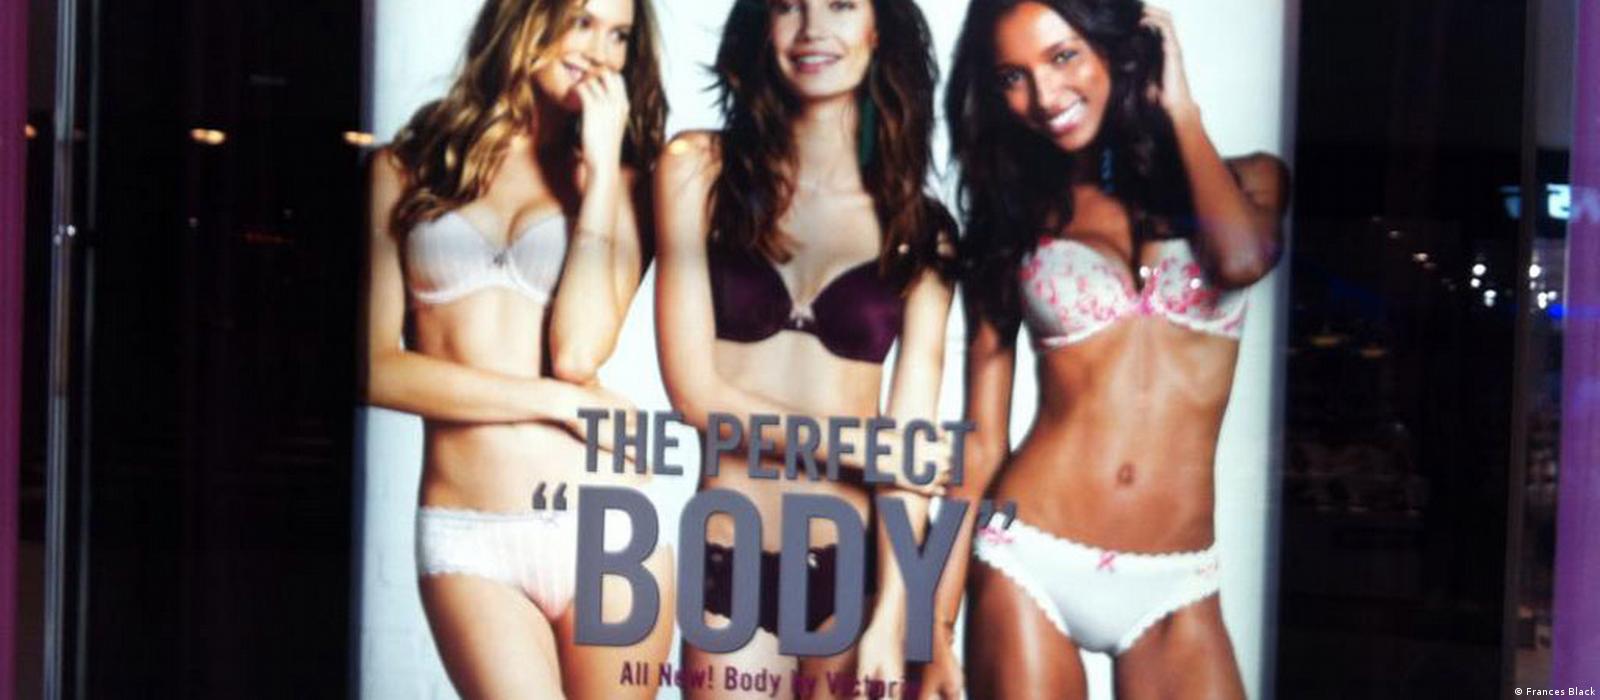 Victoria's Secret changes 'perfect body' ad slogan in wake of backlash